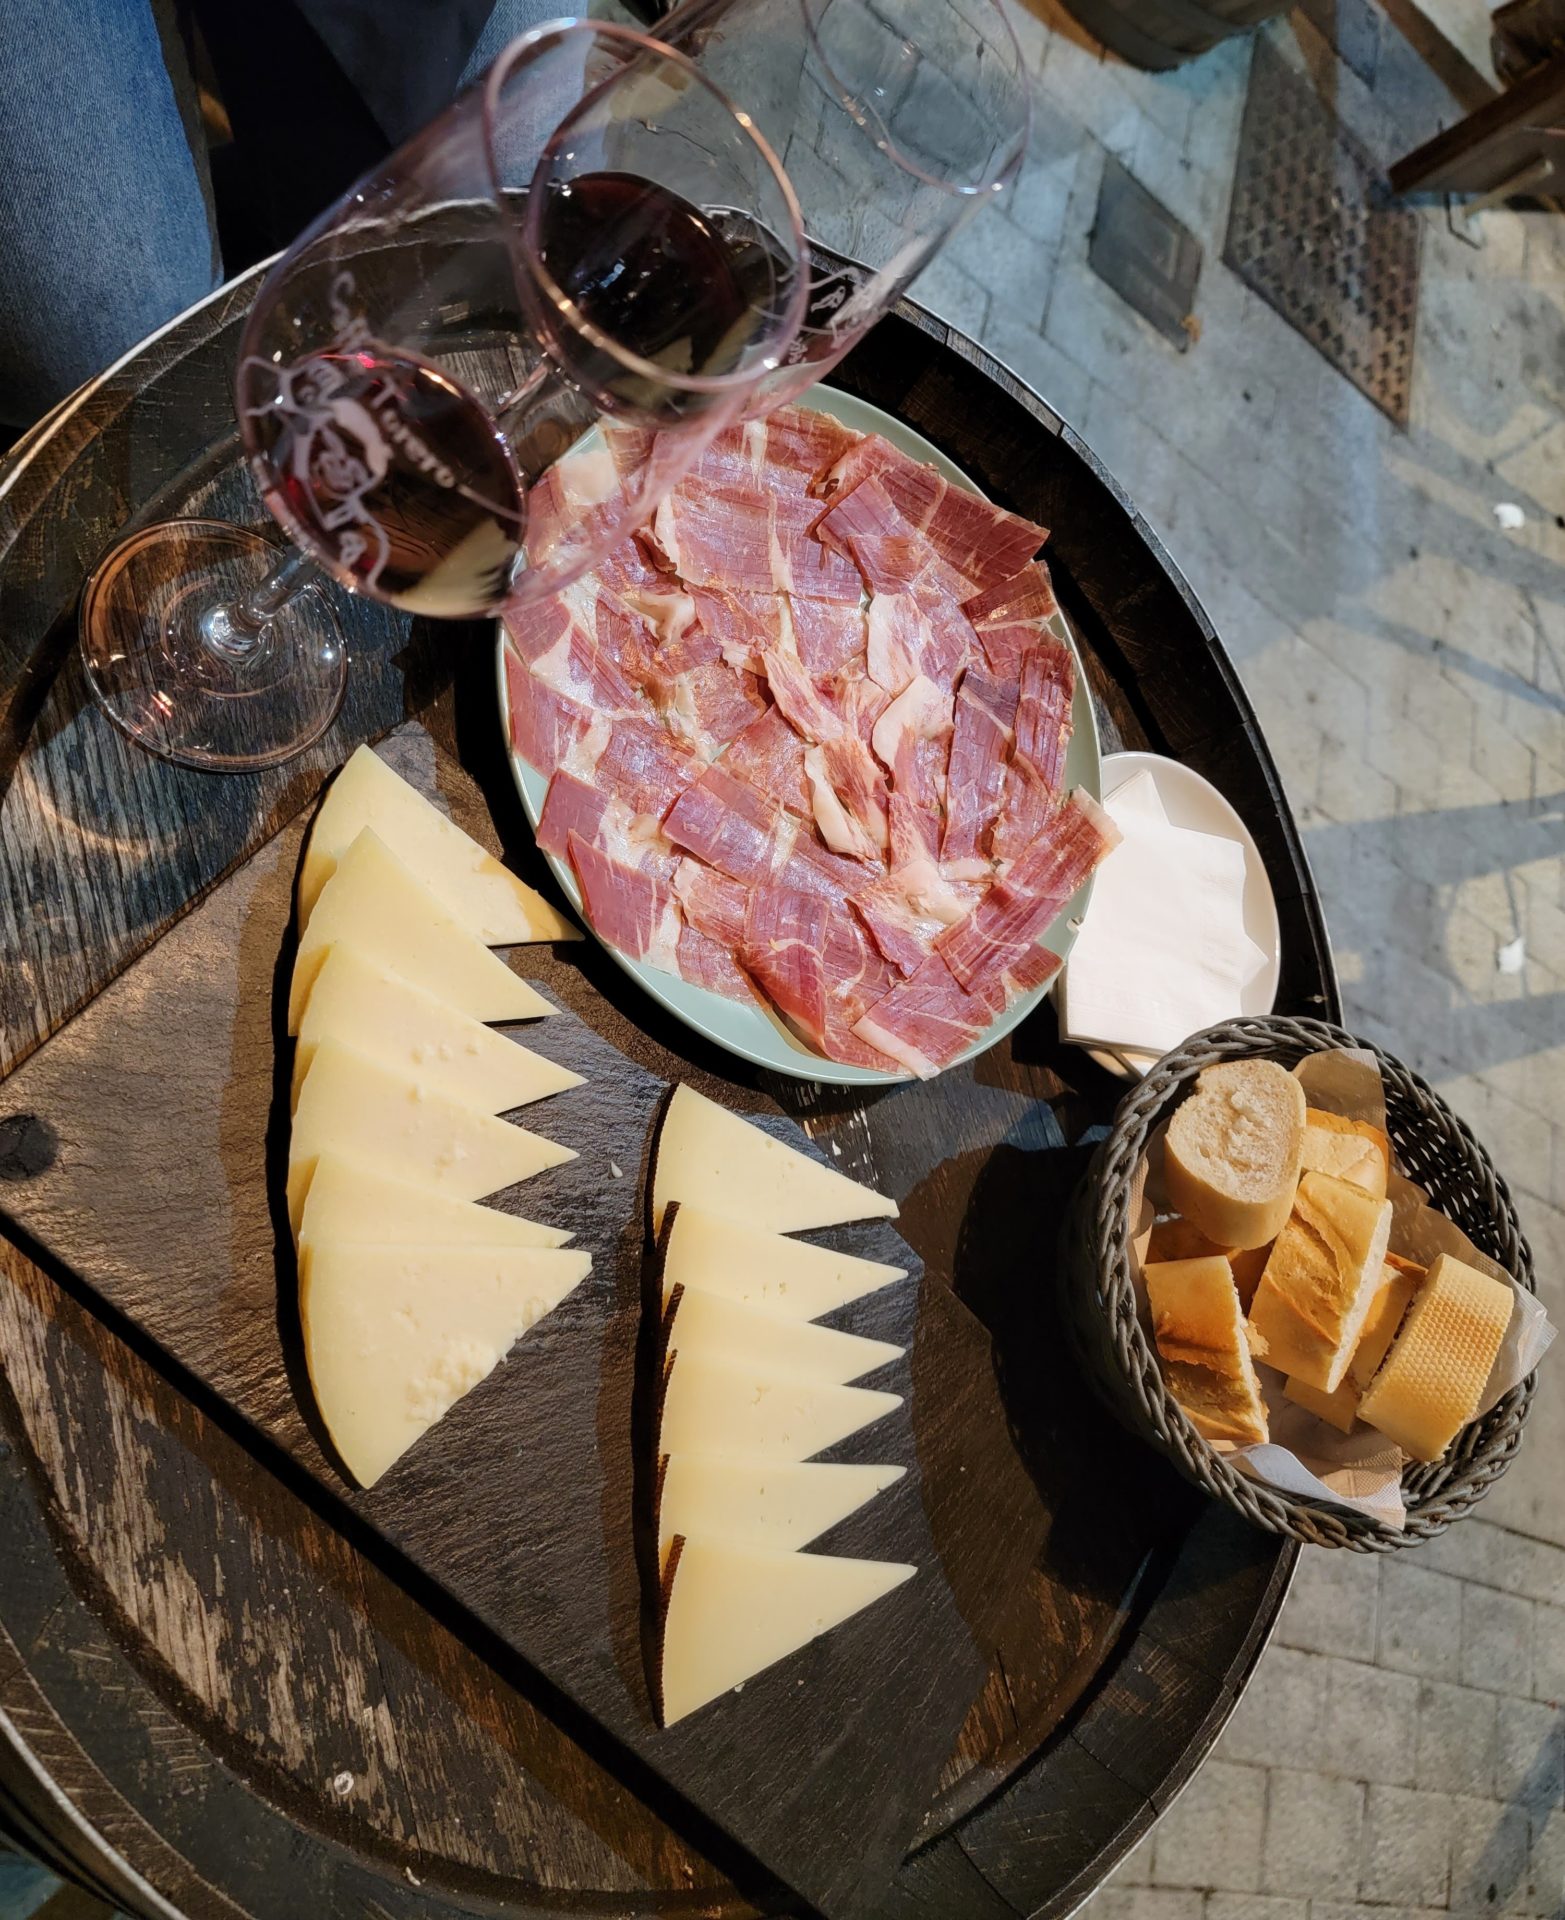 a plate of food and wine glasses